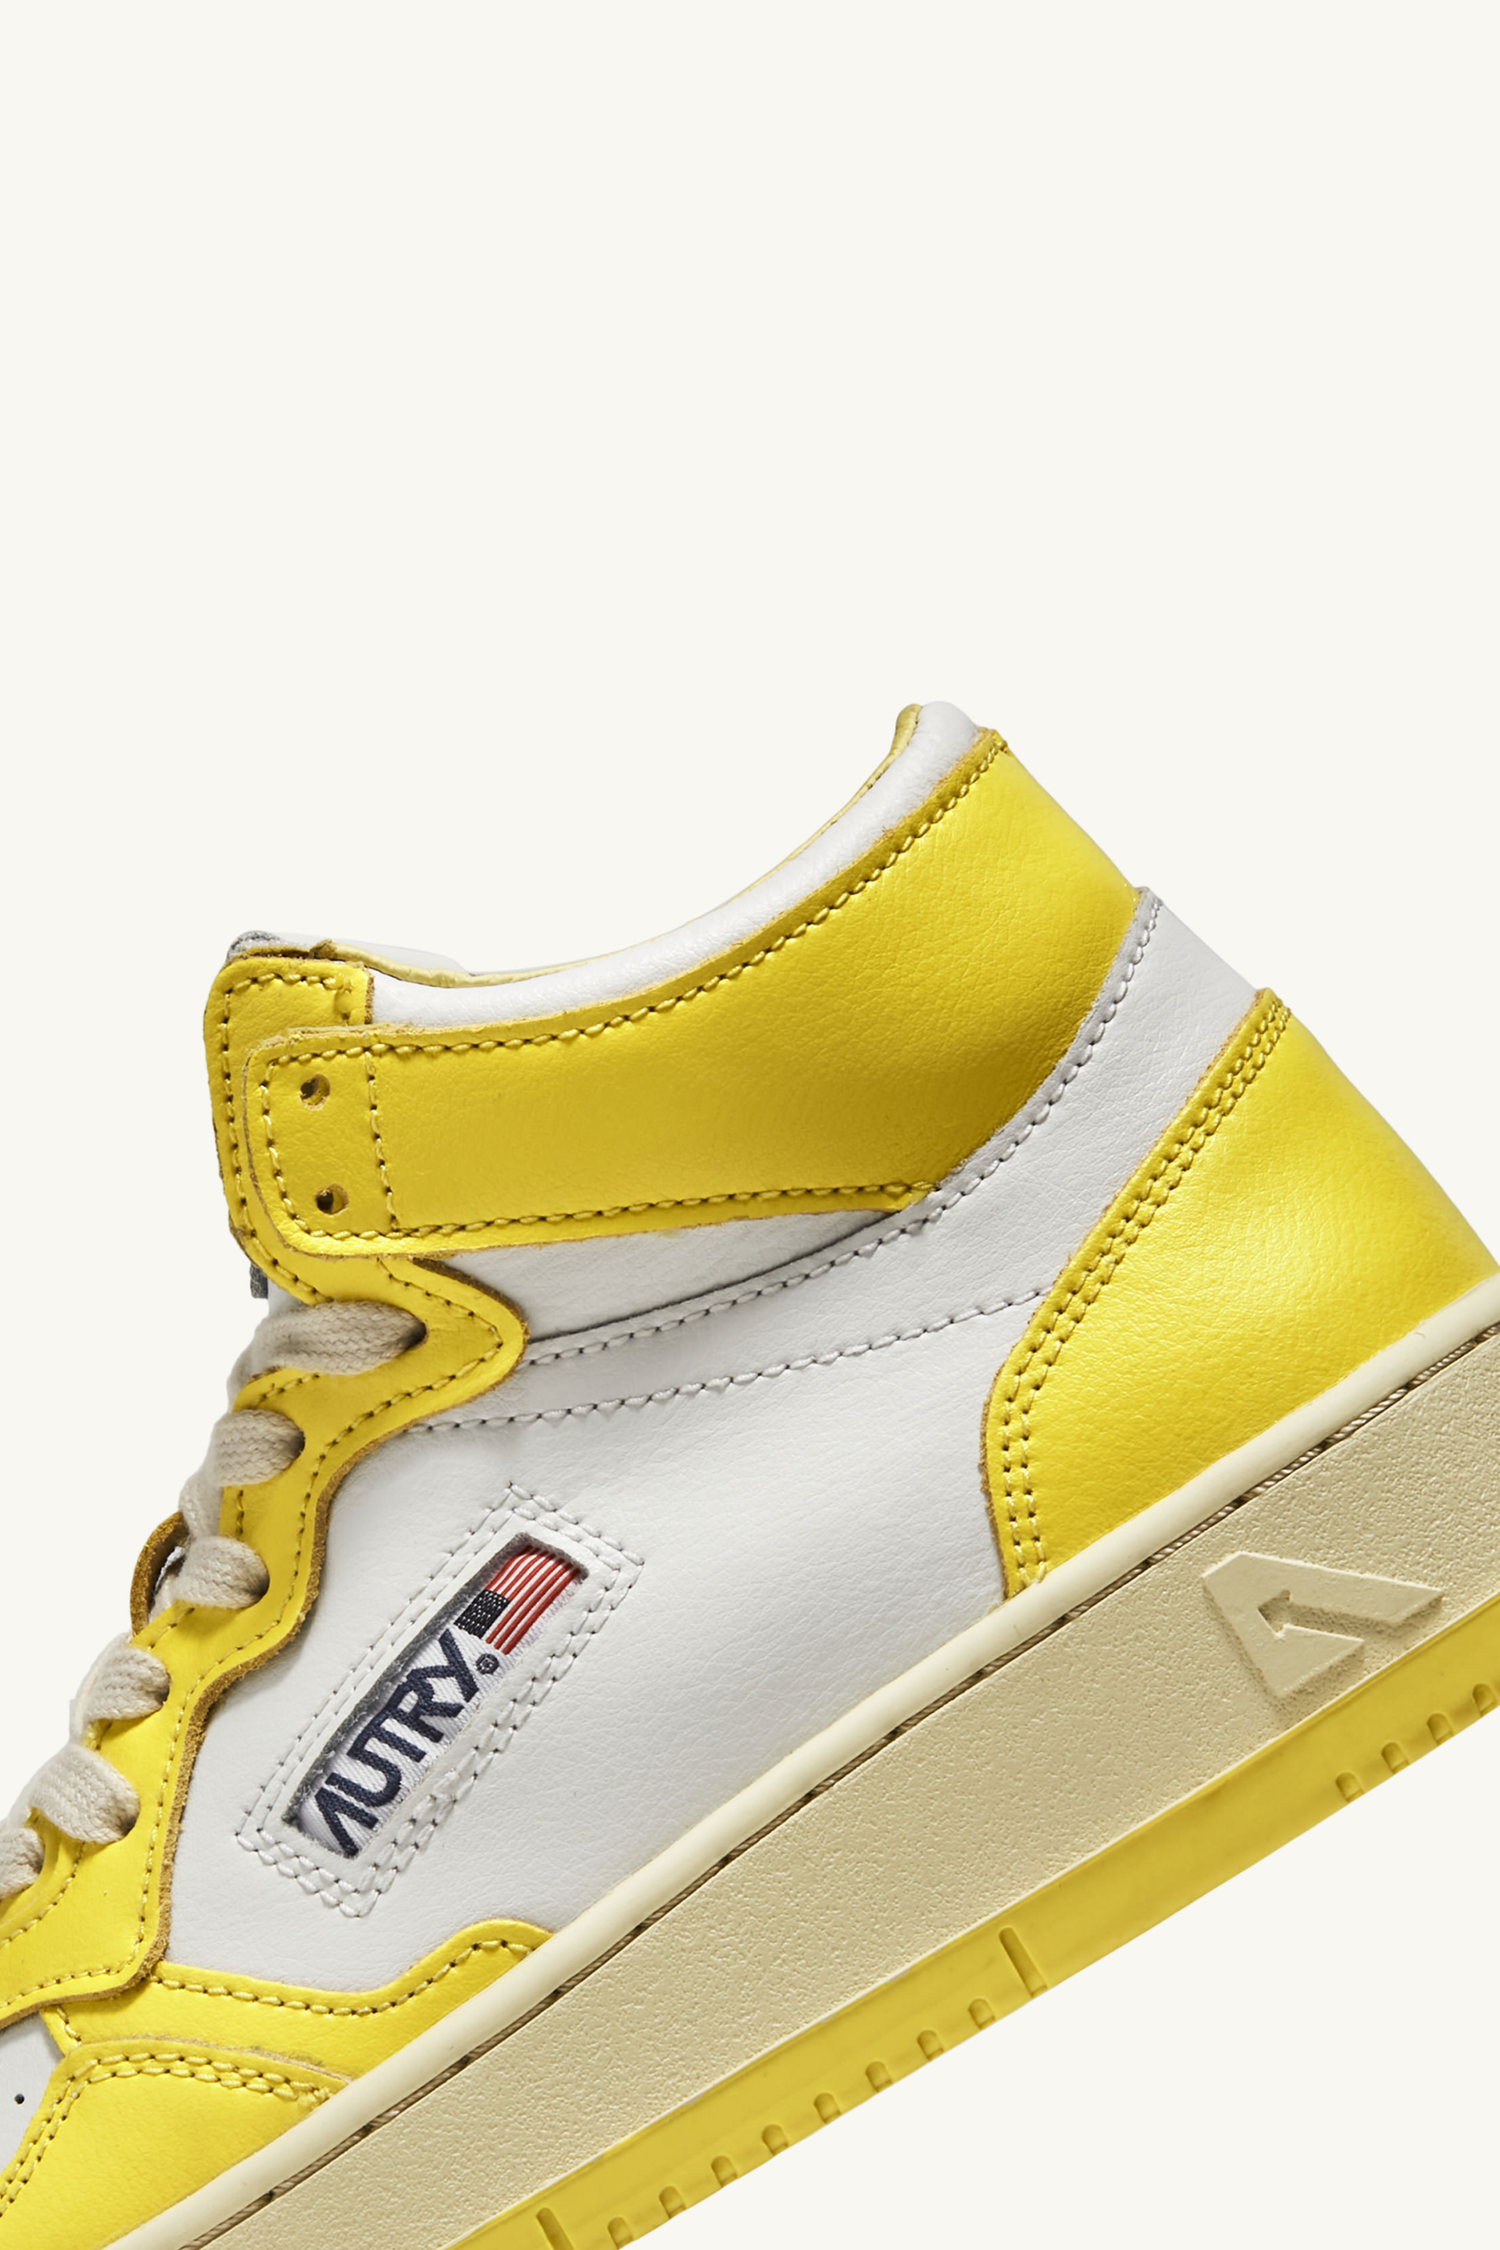 Medalist Mid sneakers, white-yellow